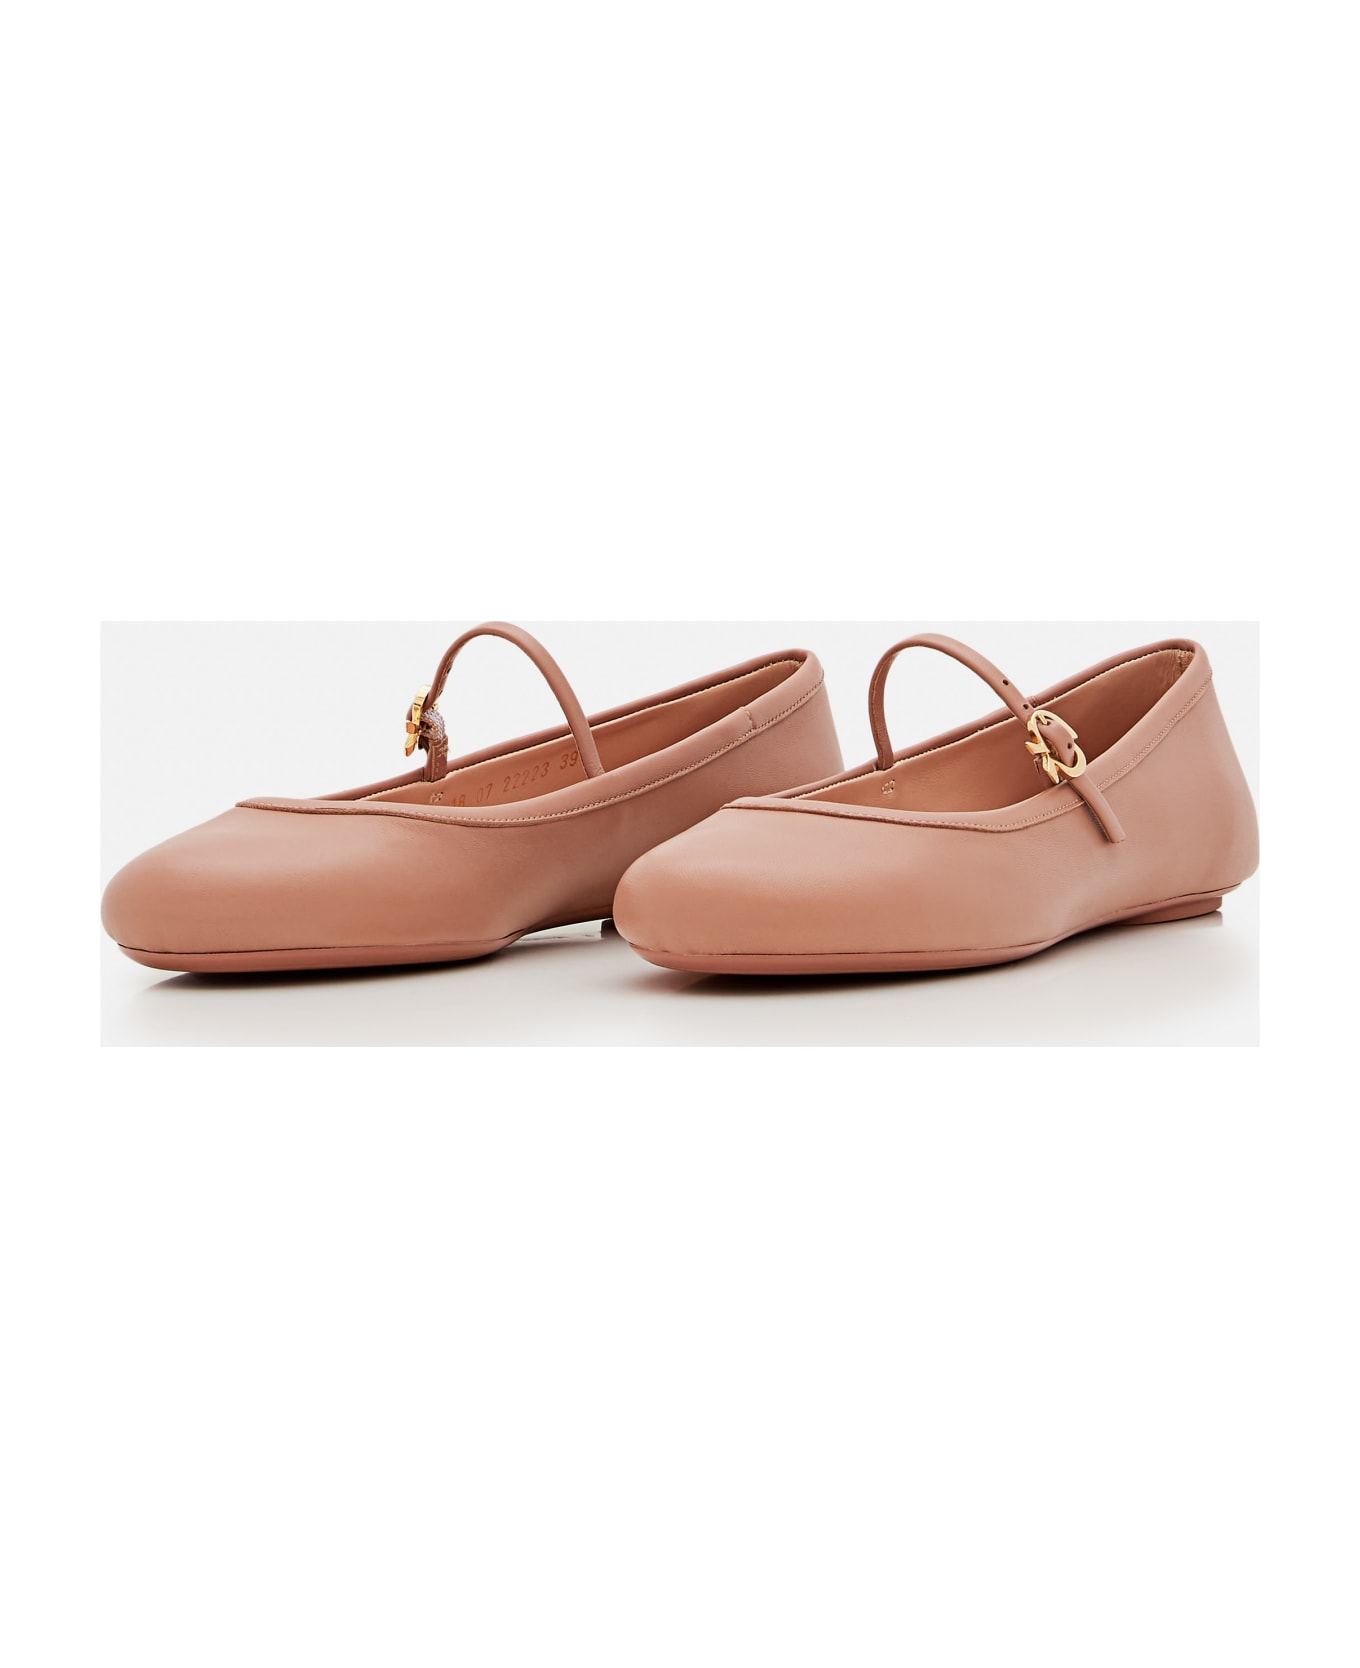 Gianvito Rossi Leather Ballet Flat - Pink フラットシューズ